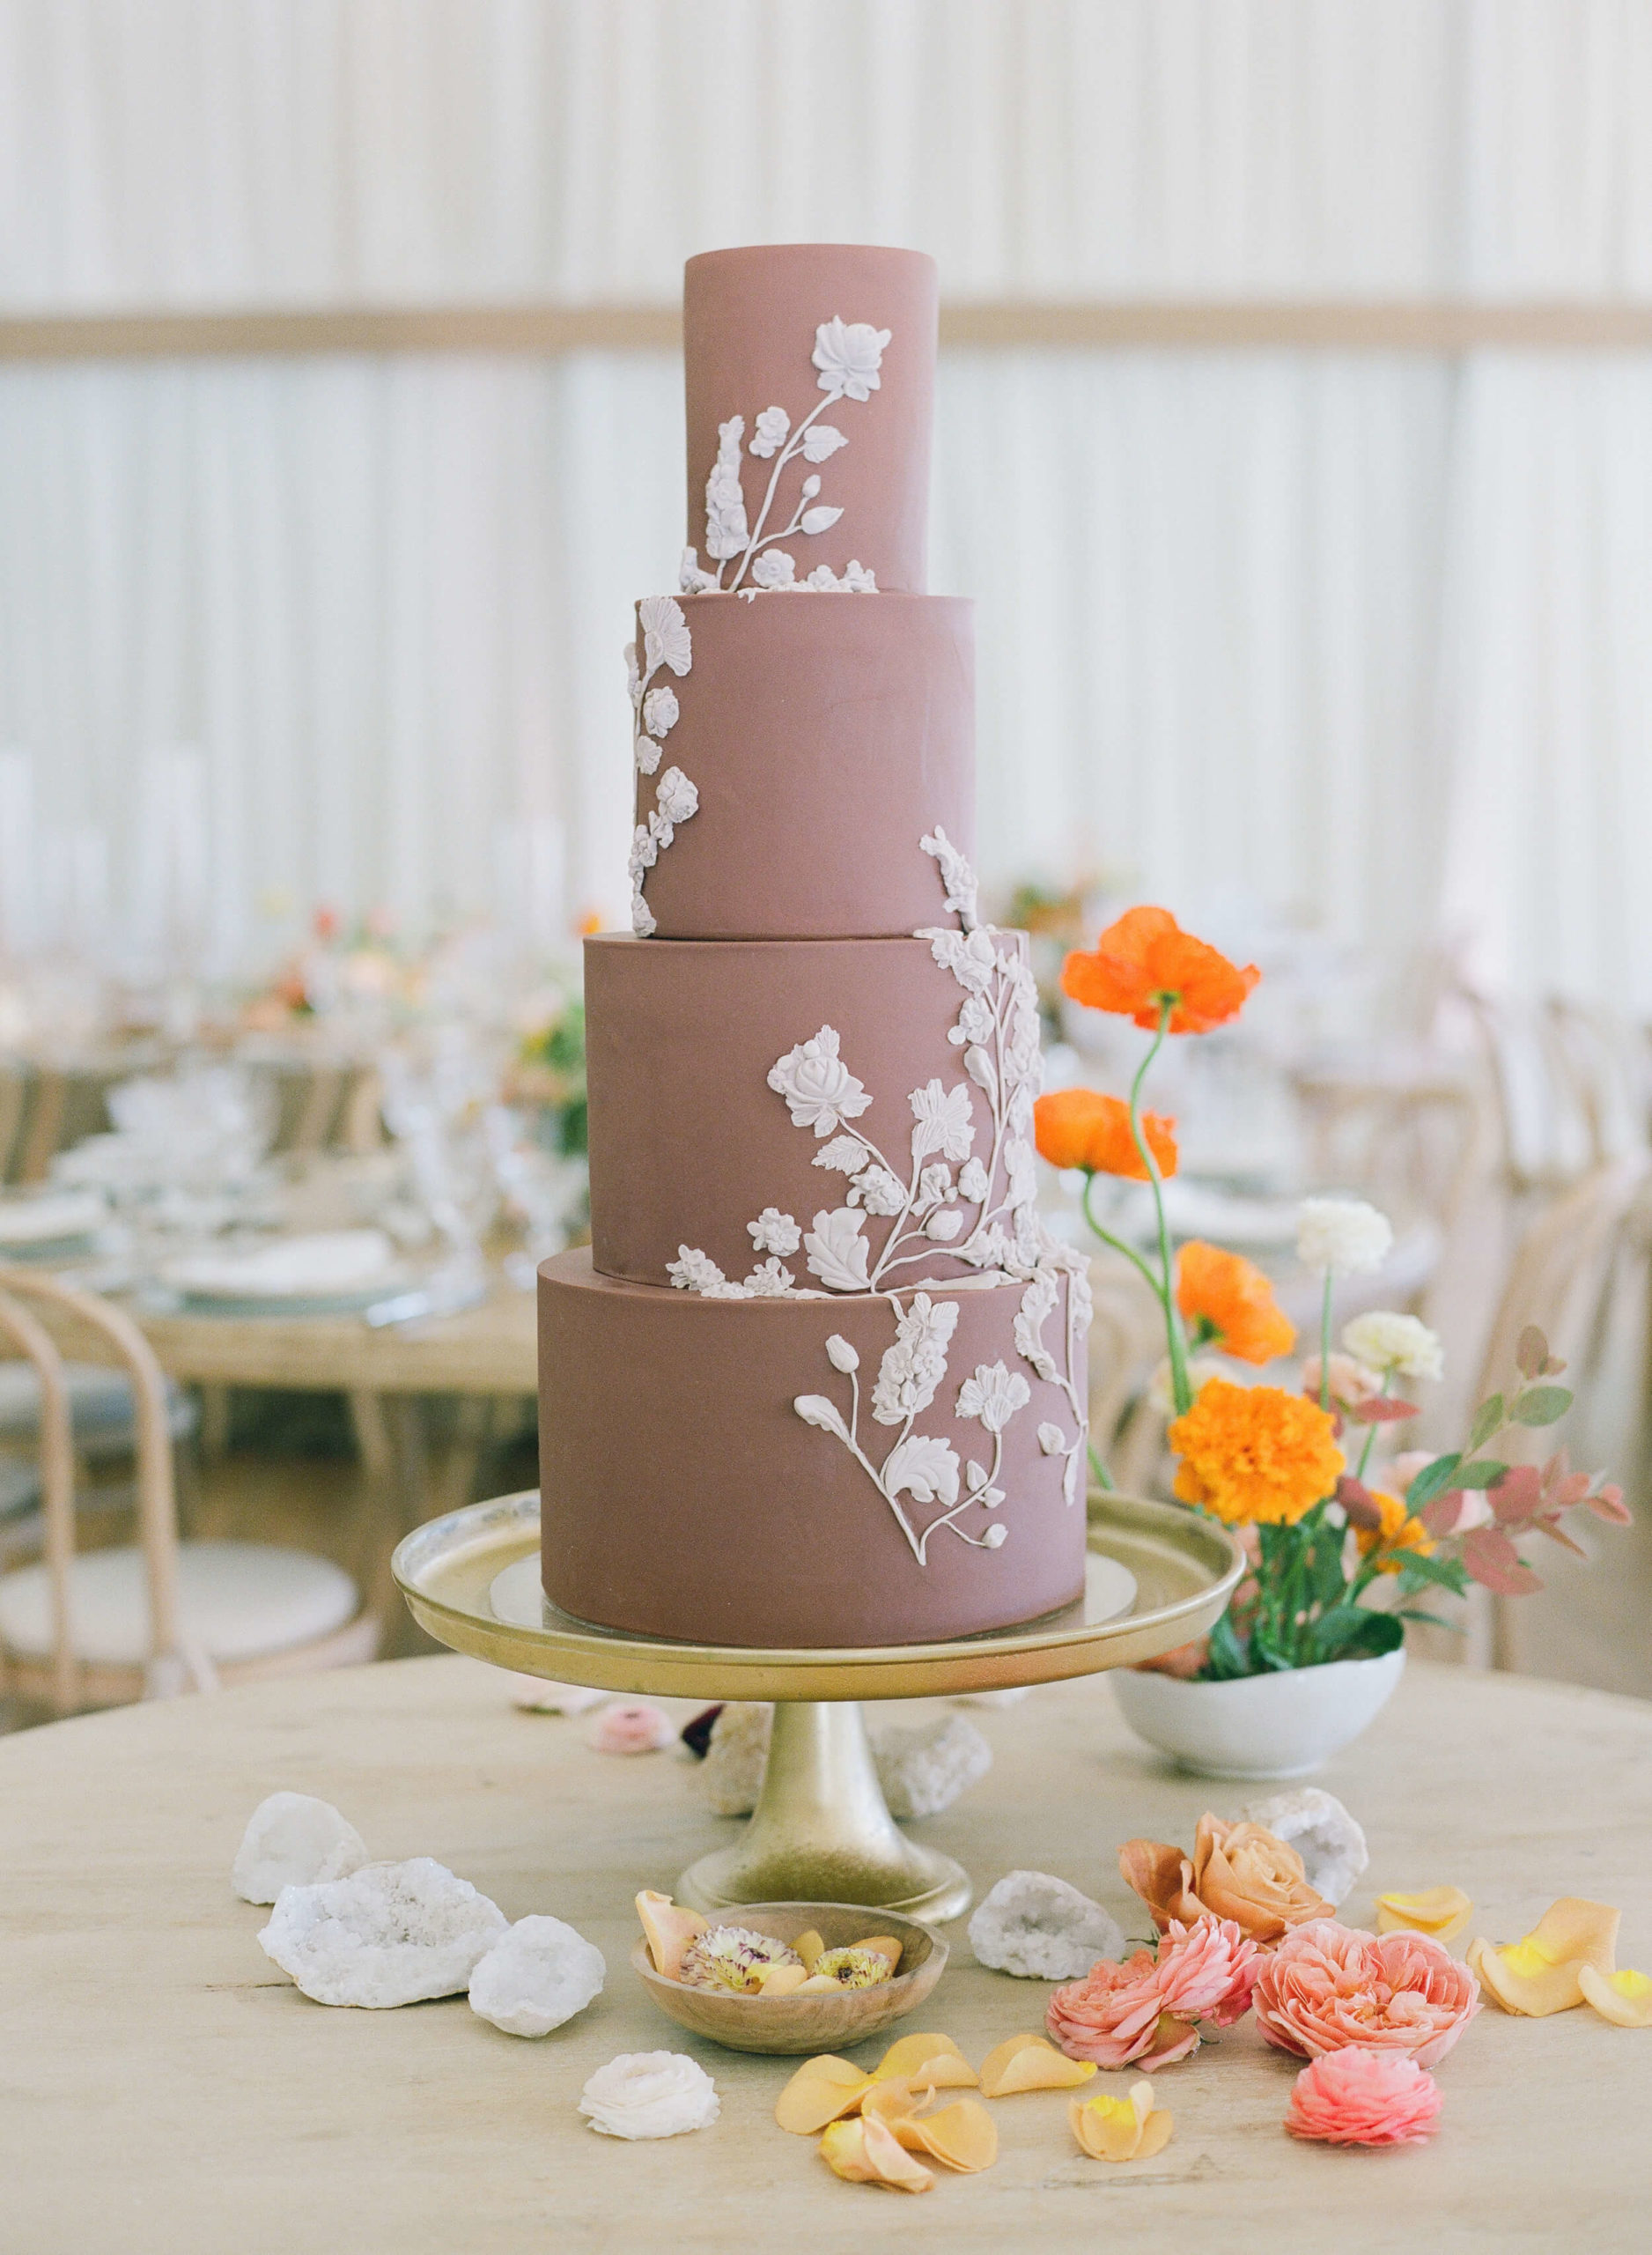 Fall wedding cake by Hey There, Cupcake